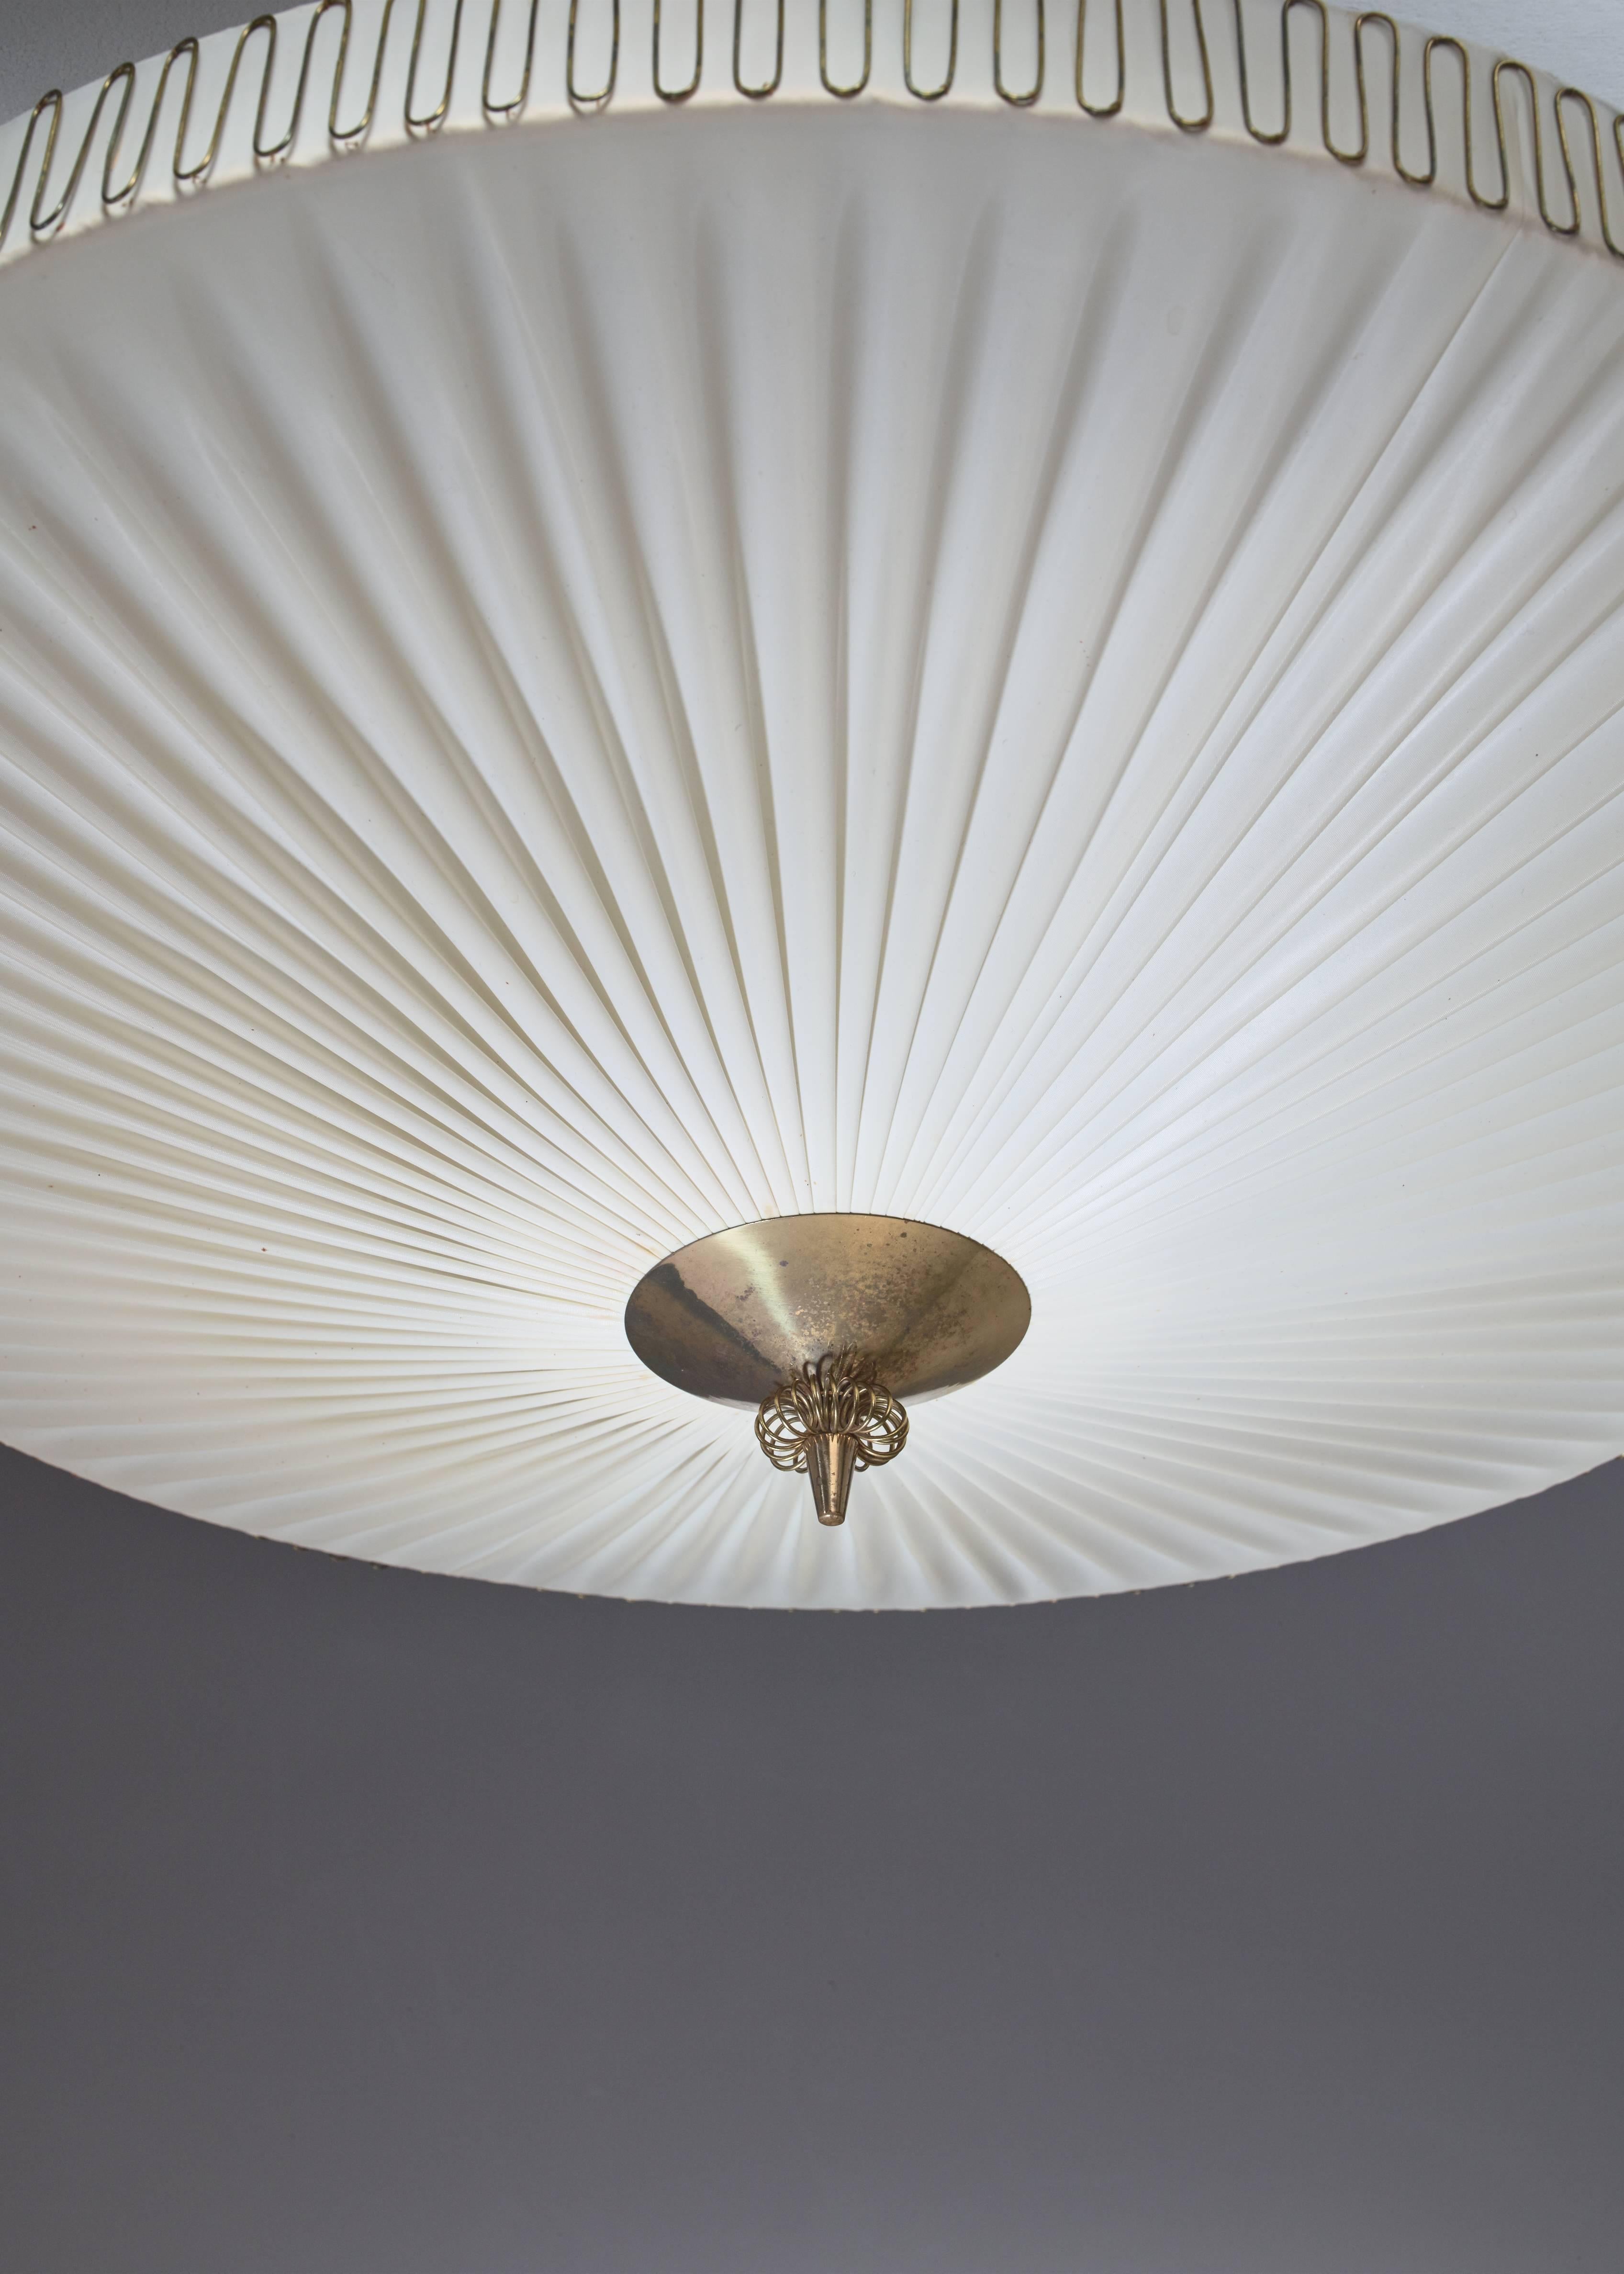 Finnish Large Round Pleated Flush Mount with Brass Centrepart by Idman, Finland, 1950s